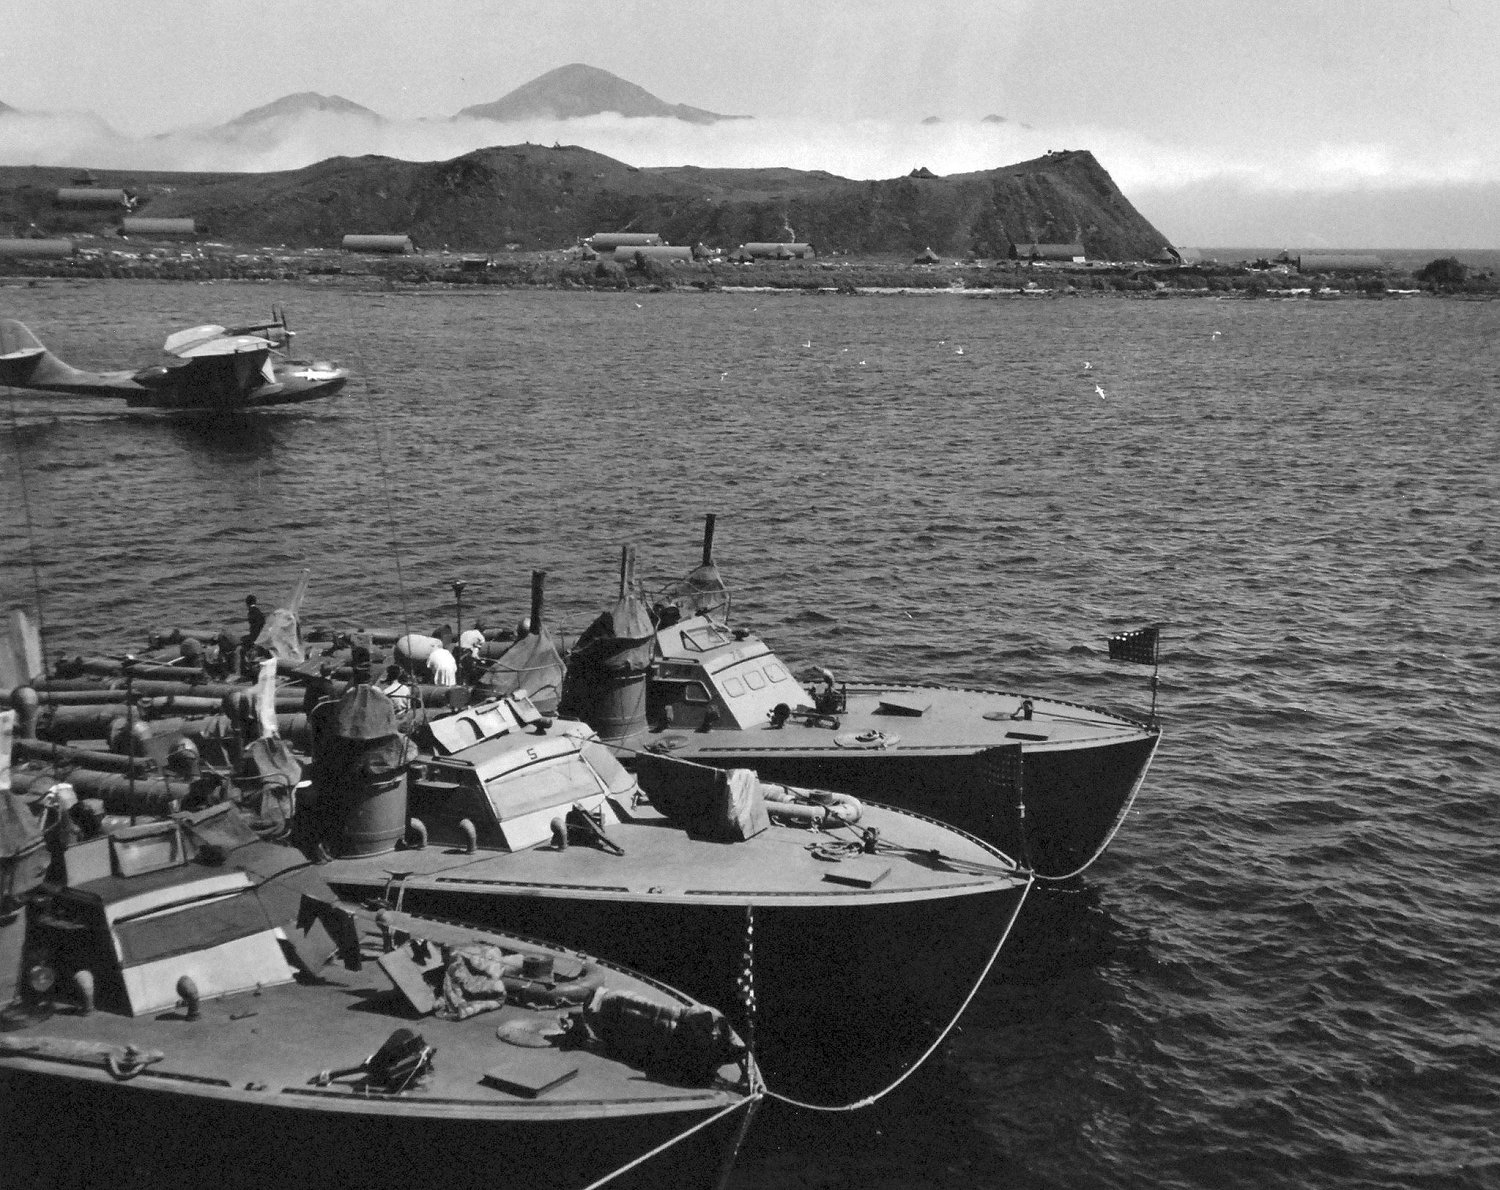 Higgins 78-foot torpedo boats of Motor Torpedo Boat Squadron 13 (MTBRon 13) moored in Attu, Alaska, Jul 943. Note PT-75 and PT-78 nested outboard of their squadron-mate and PBY Catalina patrol plane taking off.